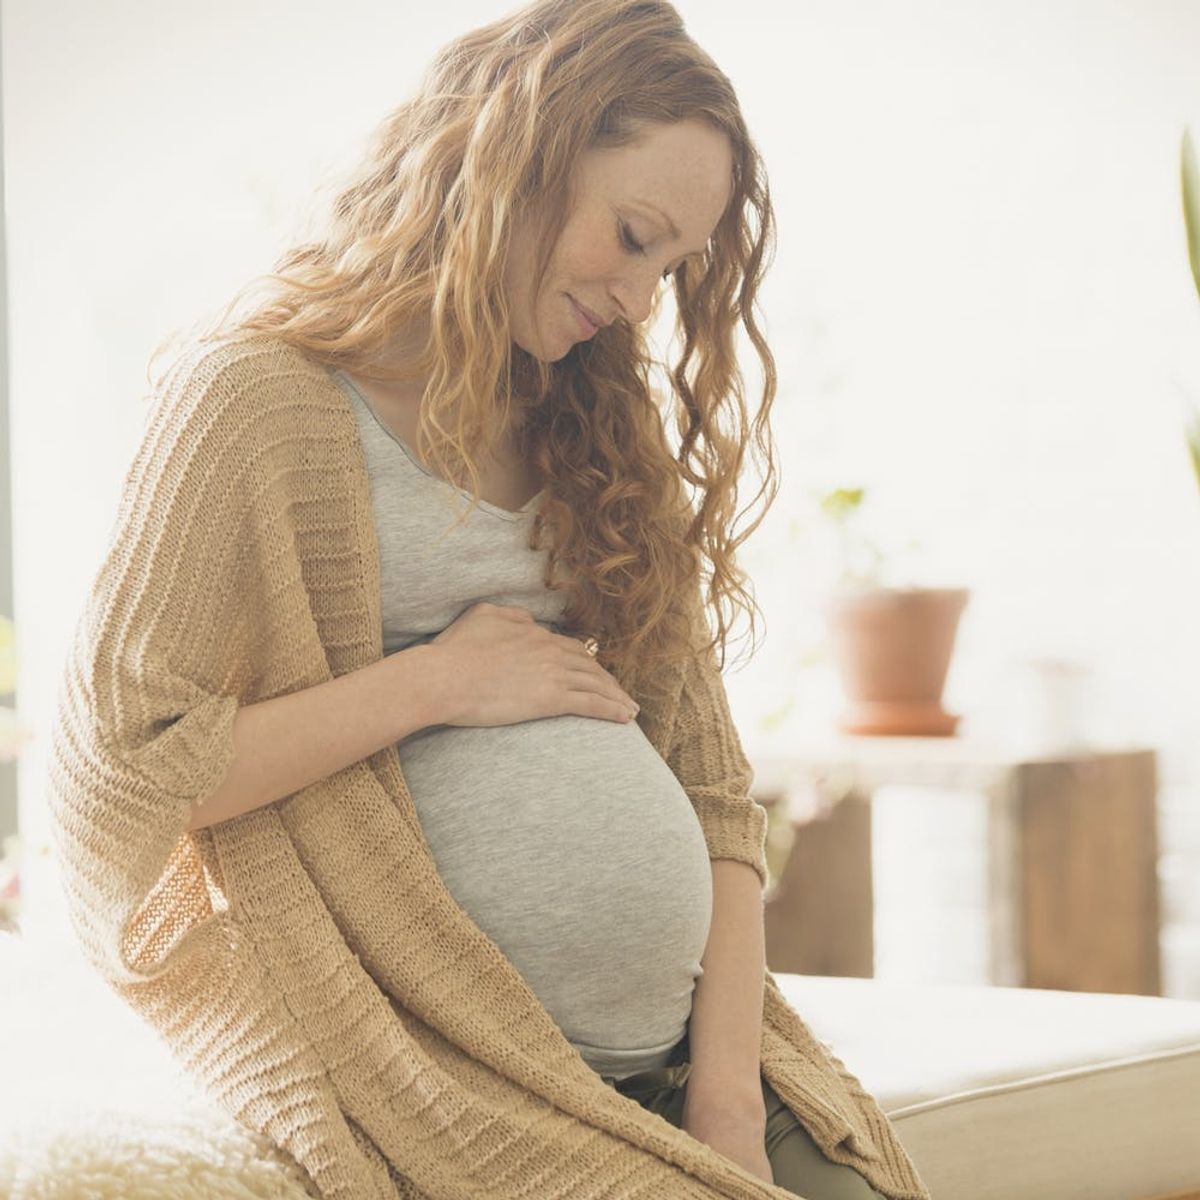 Women in Their Thirties Are Having the Most First Babies — Here’s What That Means